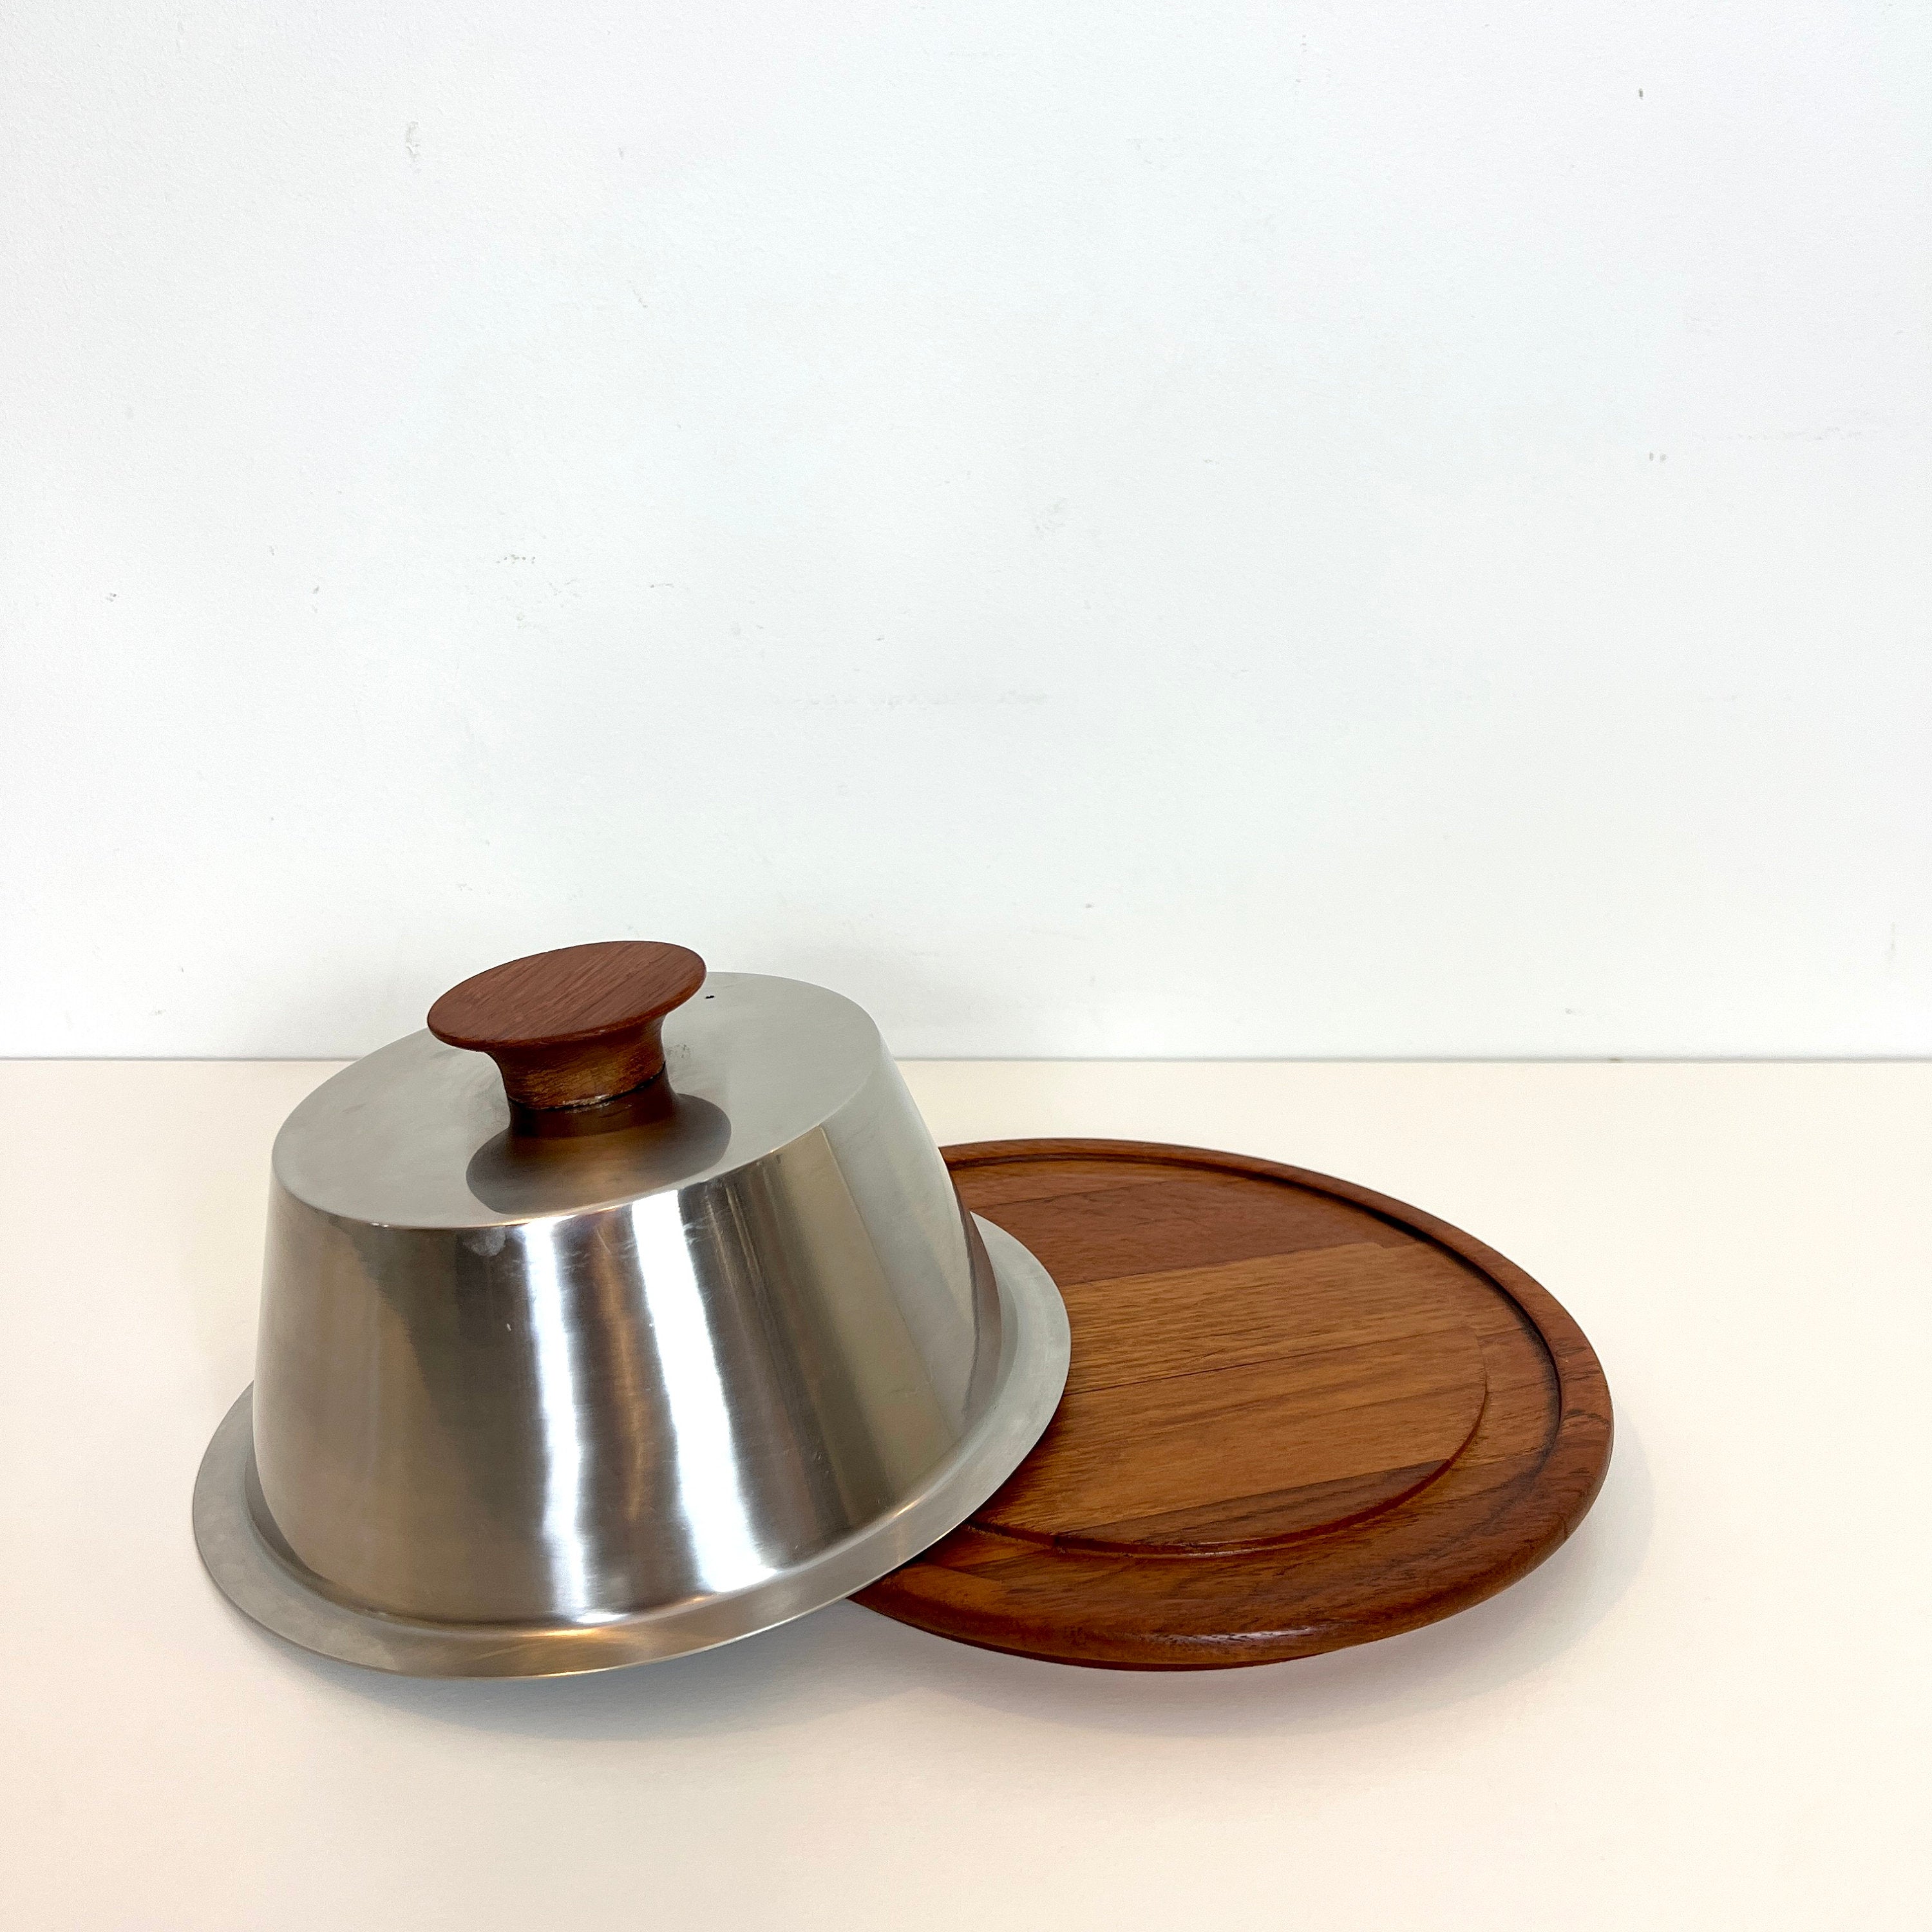 Mid Century Danish Teak Cheese Board Plate with dome lid